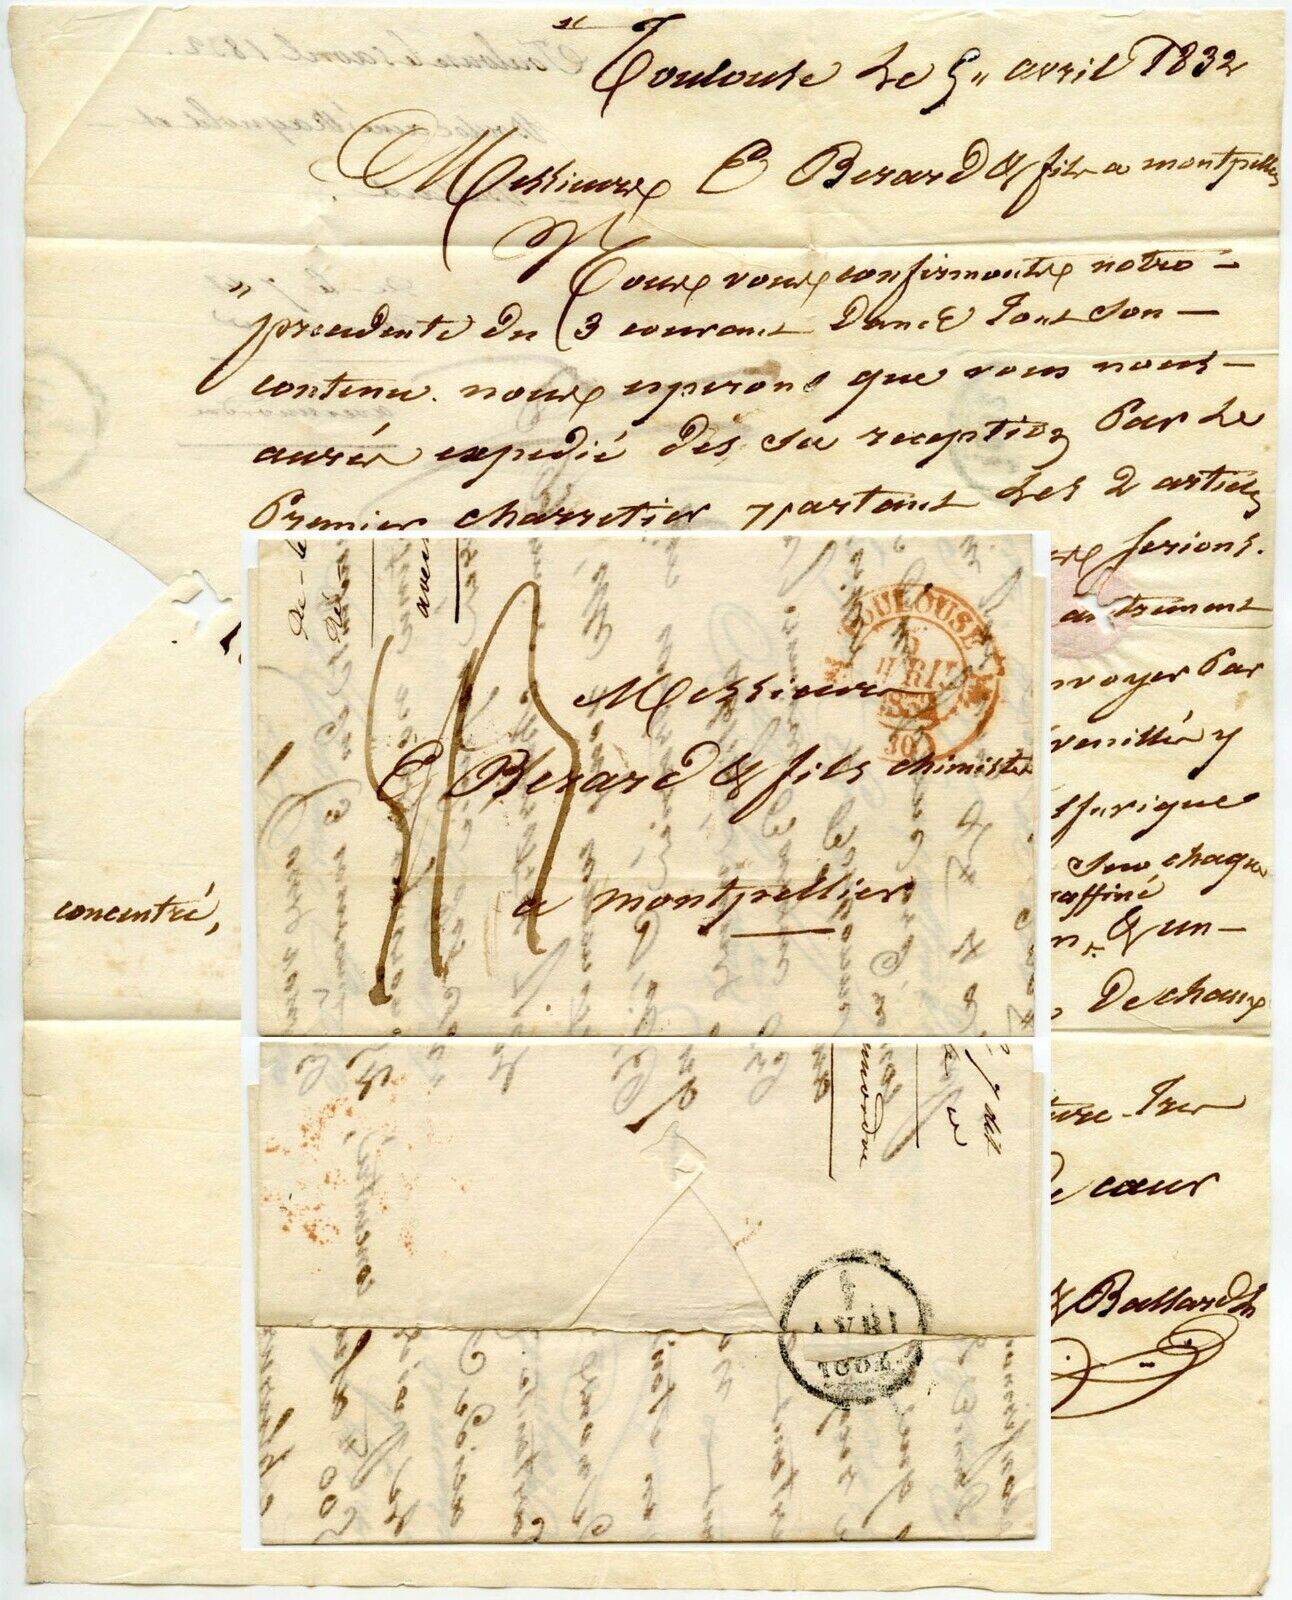 FRANCE 1832 FLEURONS TYPE POSTMARK TOULOUSE in RED LETTER to MONTPELLIER